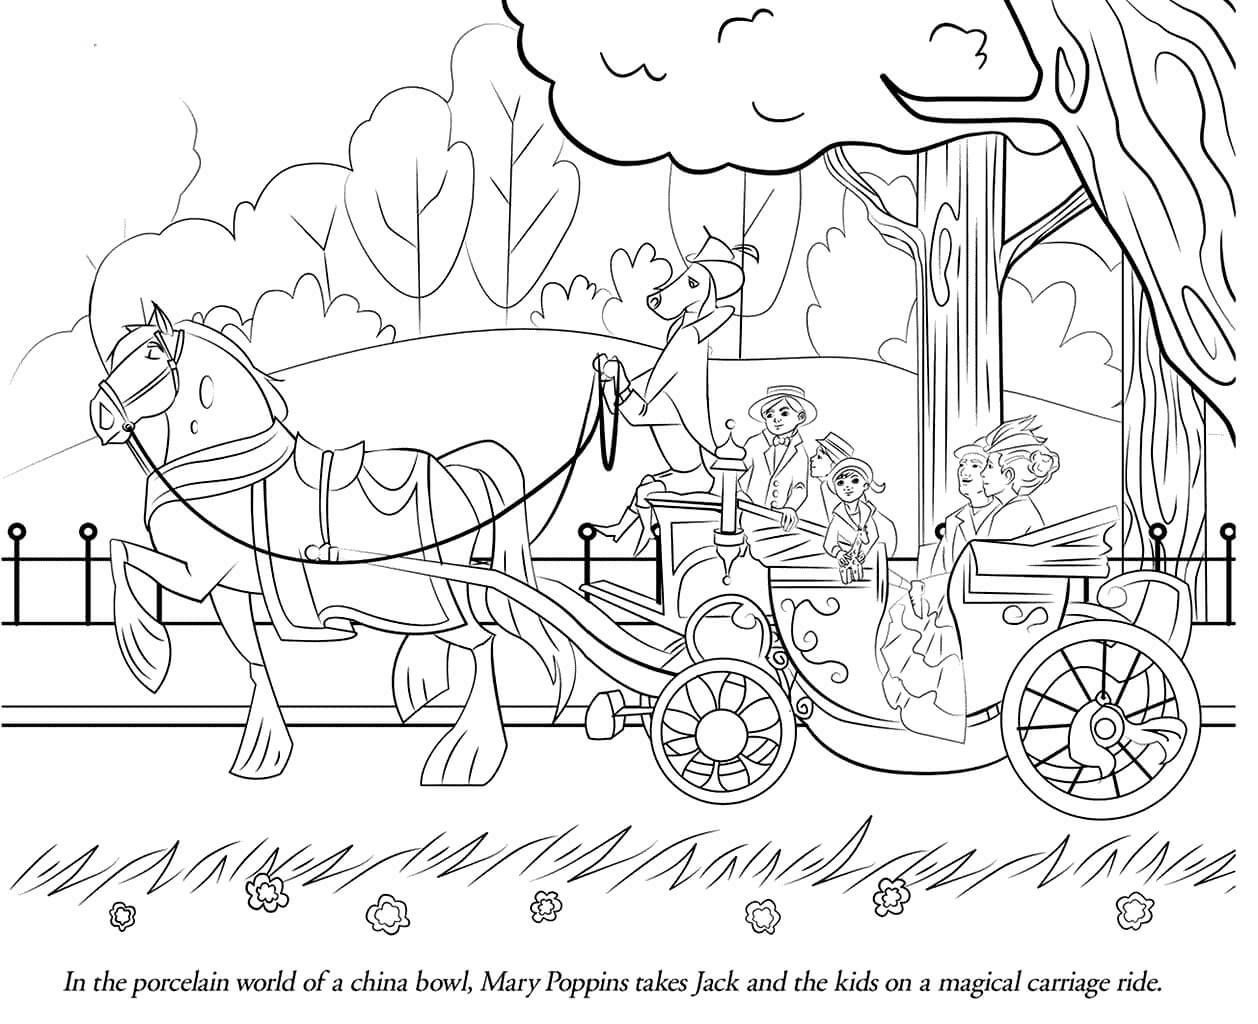 Mary Poppins Returns Coloring Page